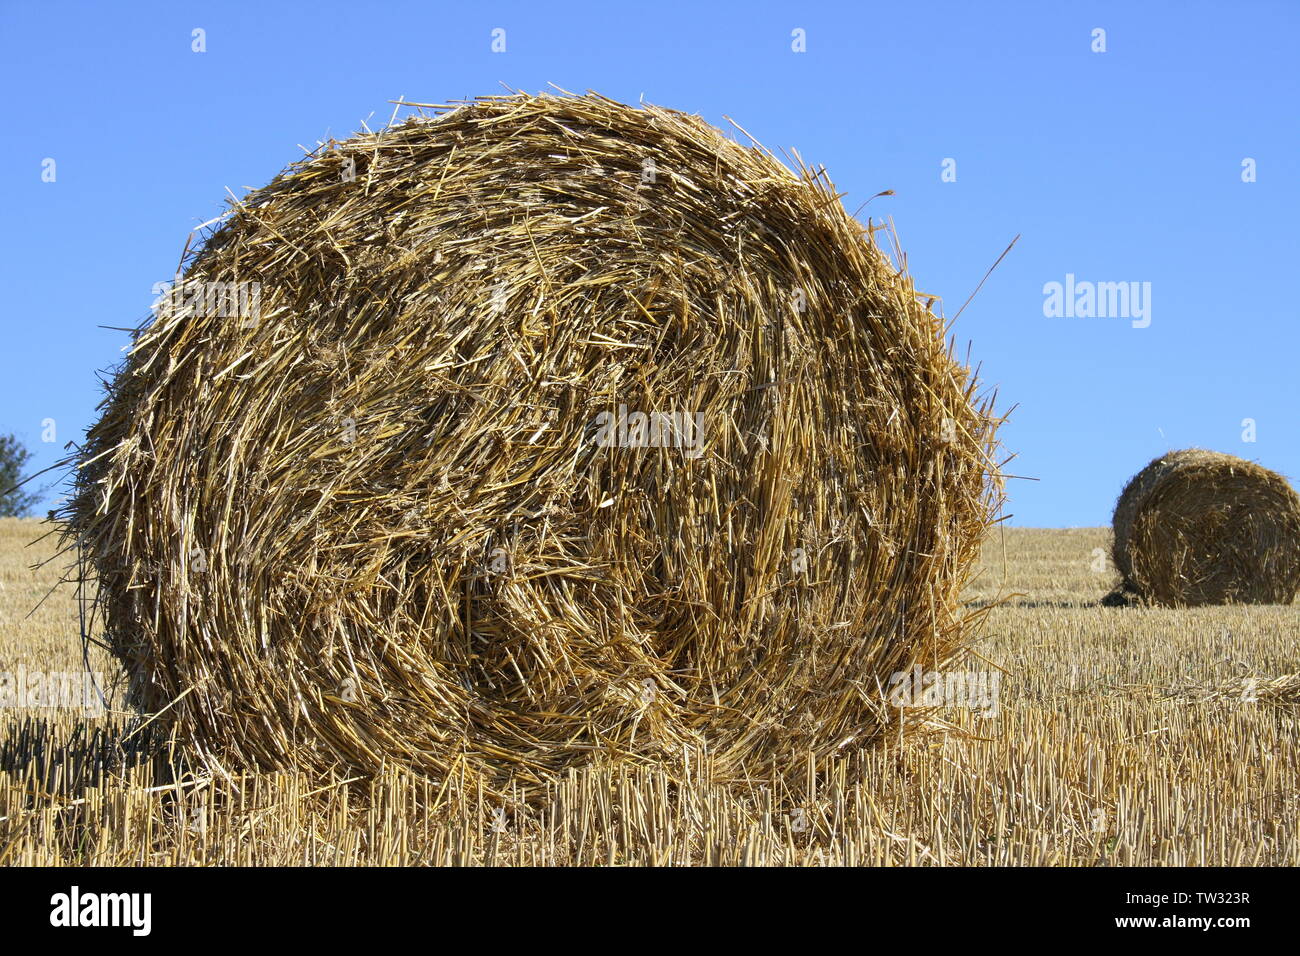 Large round straw roll with blue sky in background Stock Photo